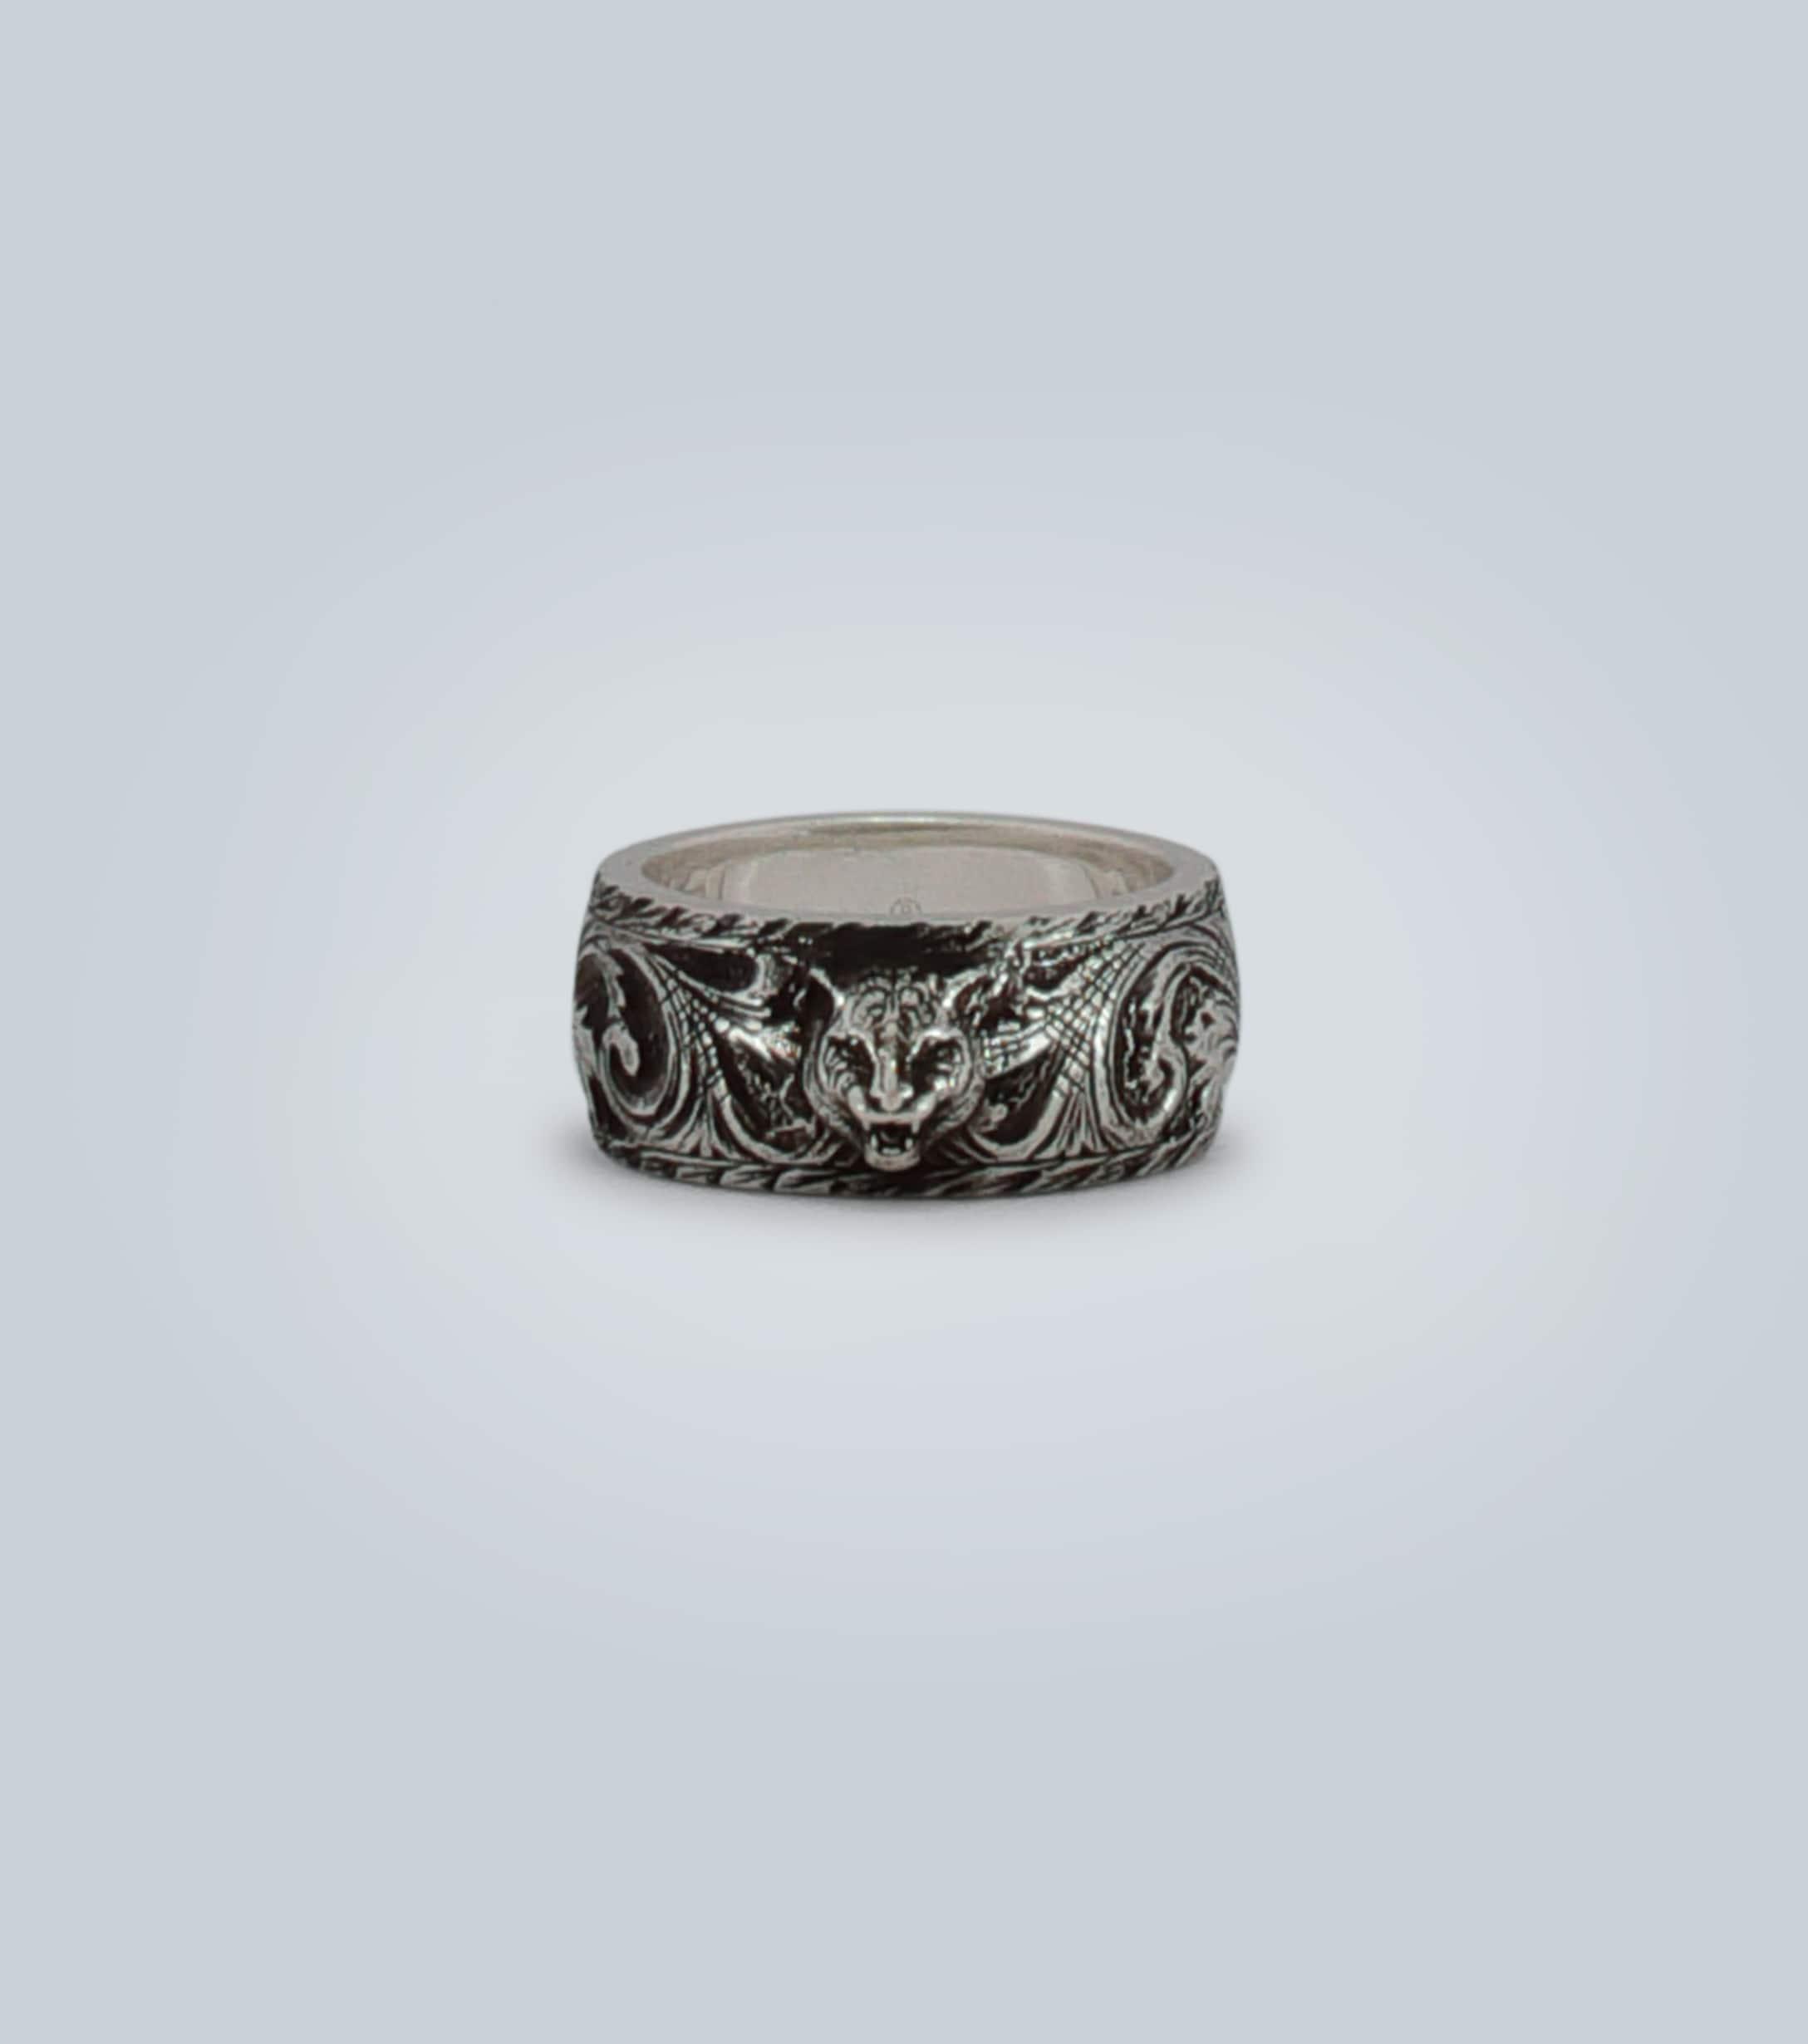 gucci silver ring with feline head